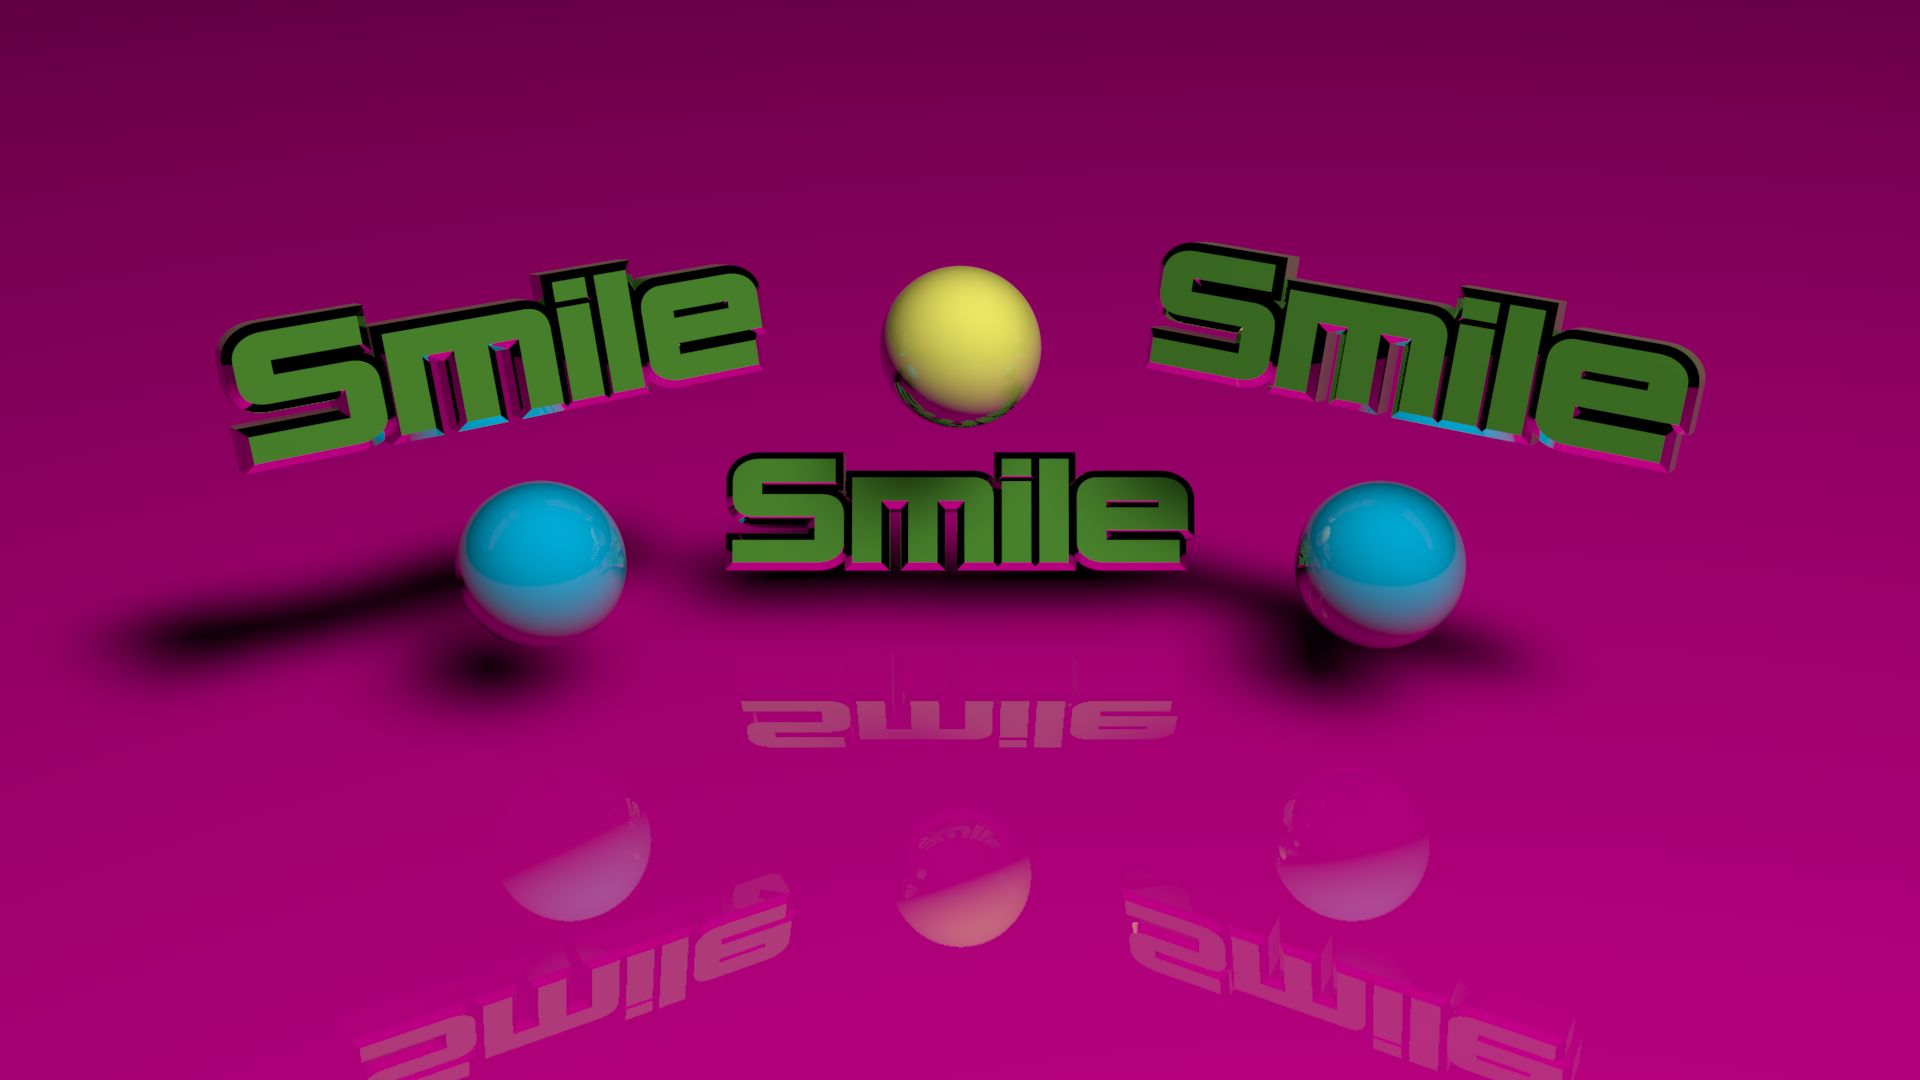 Smile Smile Smile by litingphires